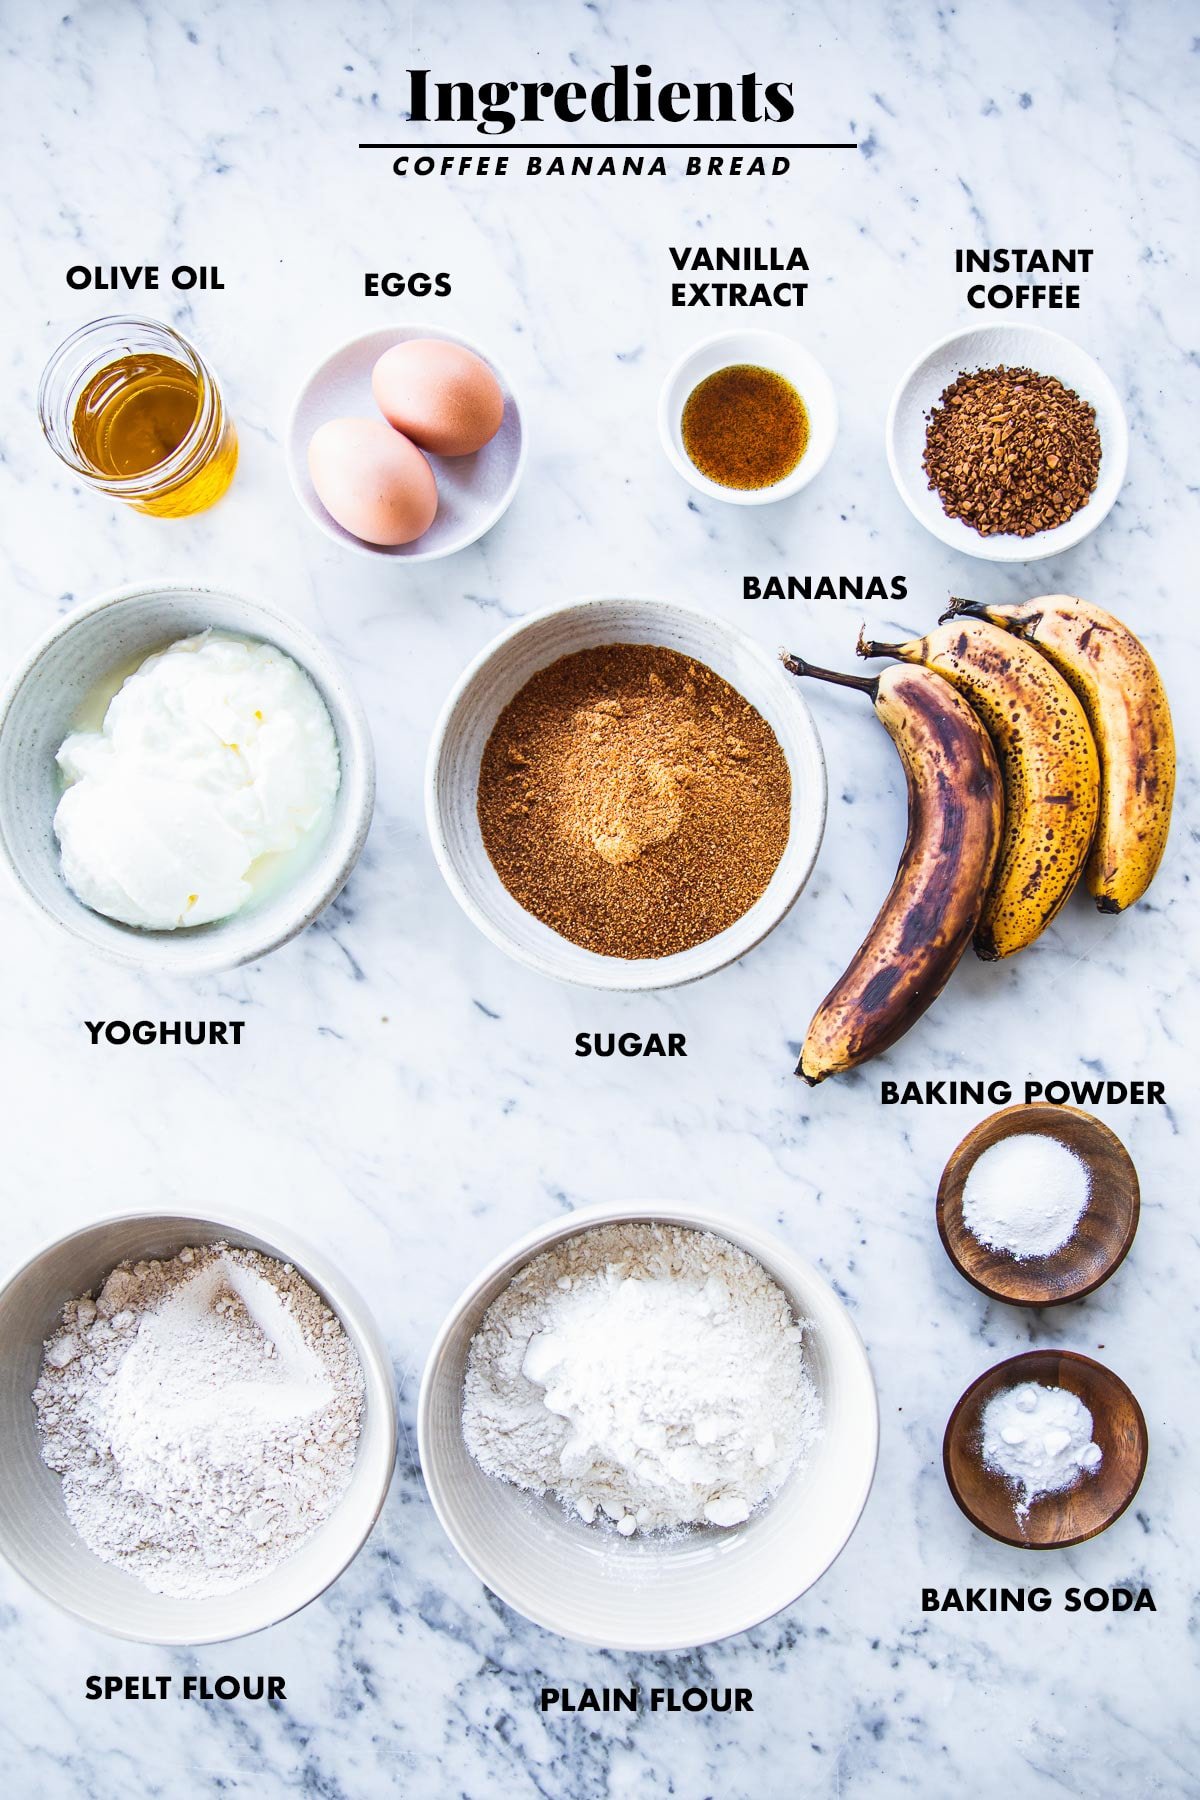 Coffee Banana Bread ingredients measured out in bowls on a table top.